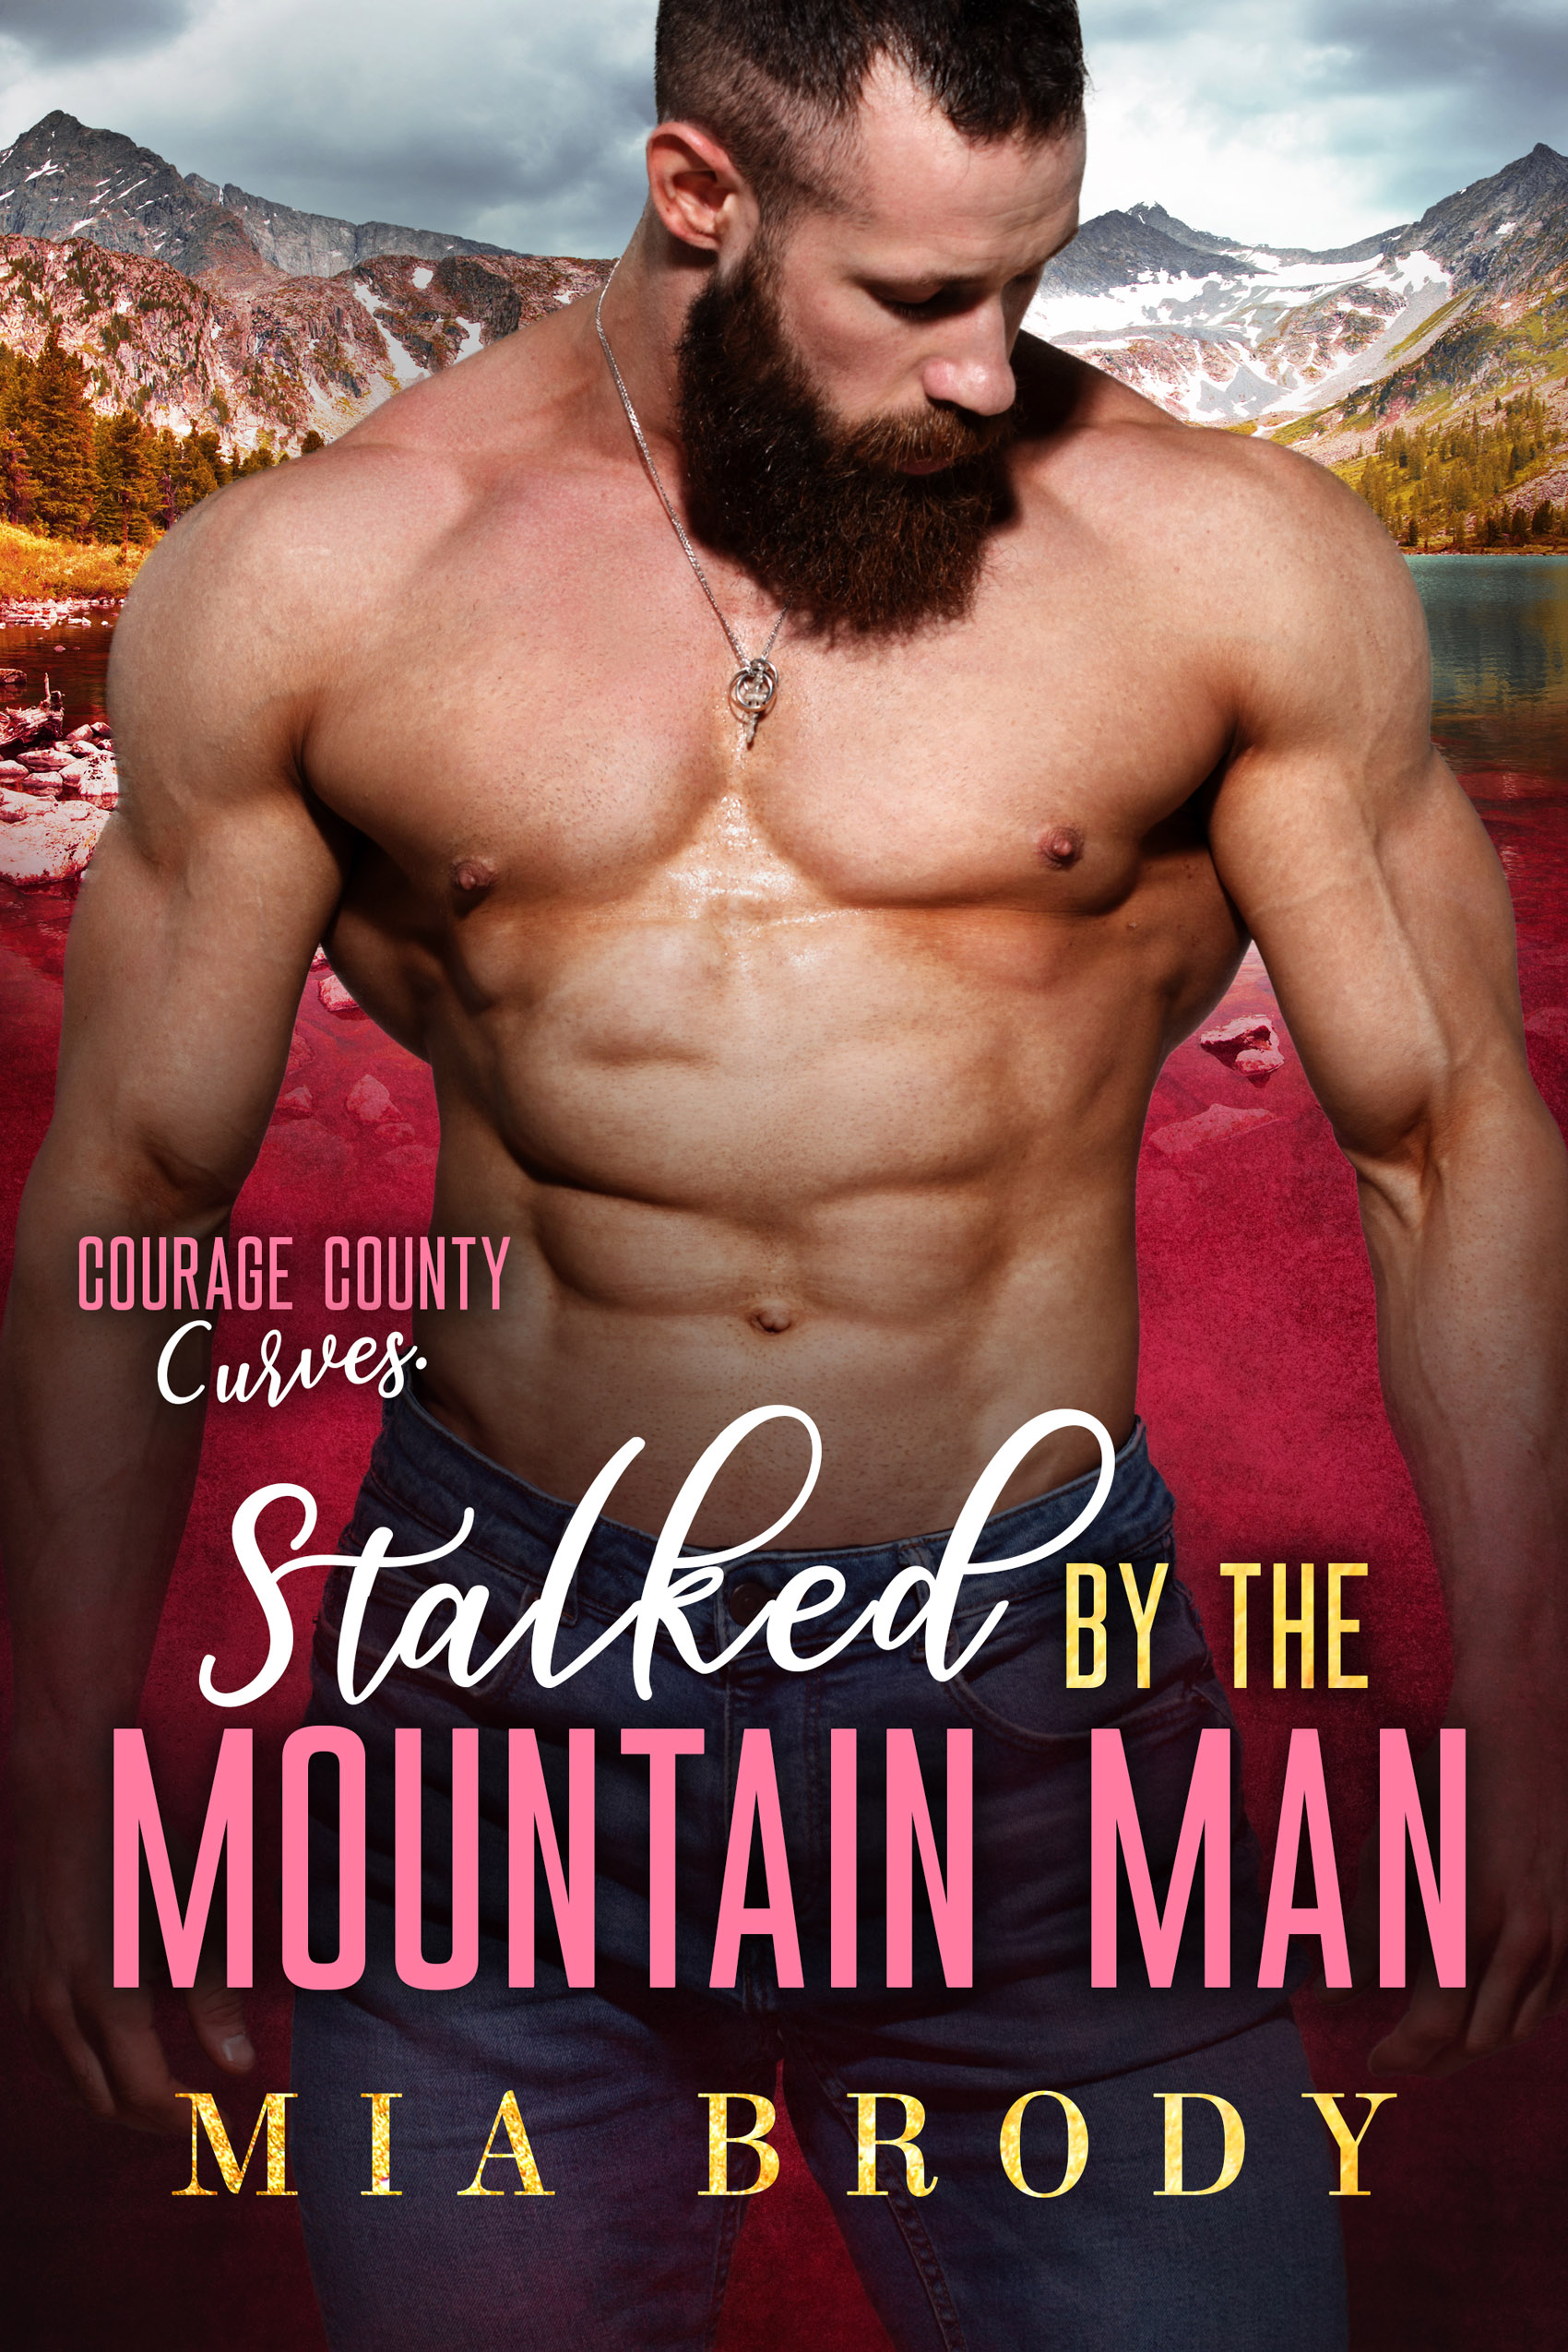 Stalked by the Mountain Man by Mia Brody